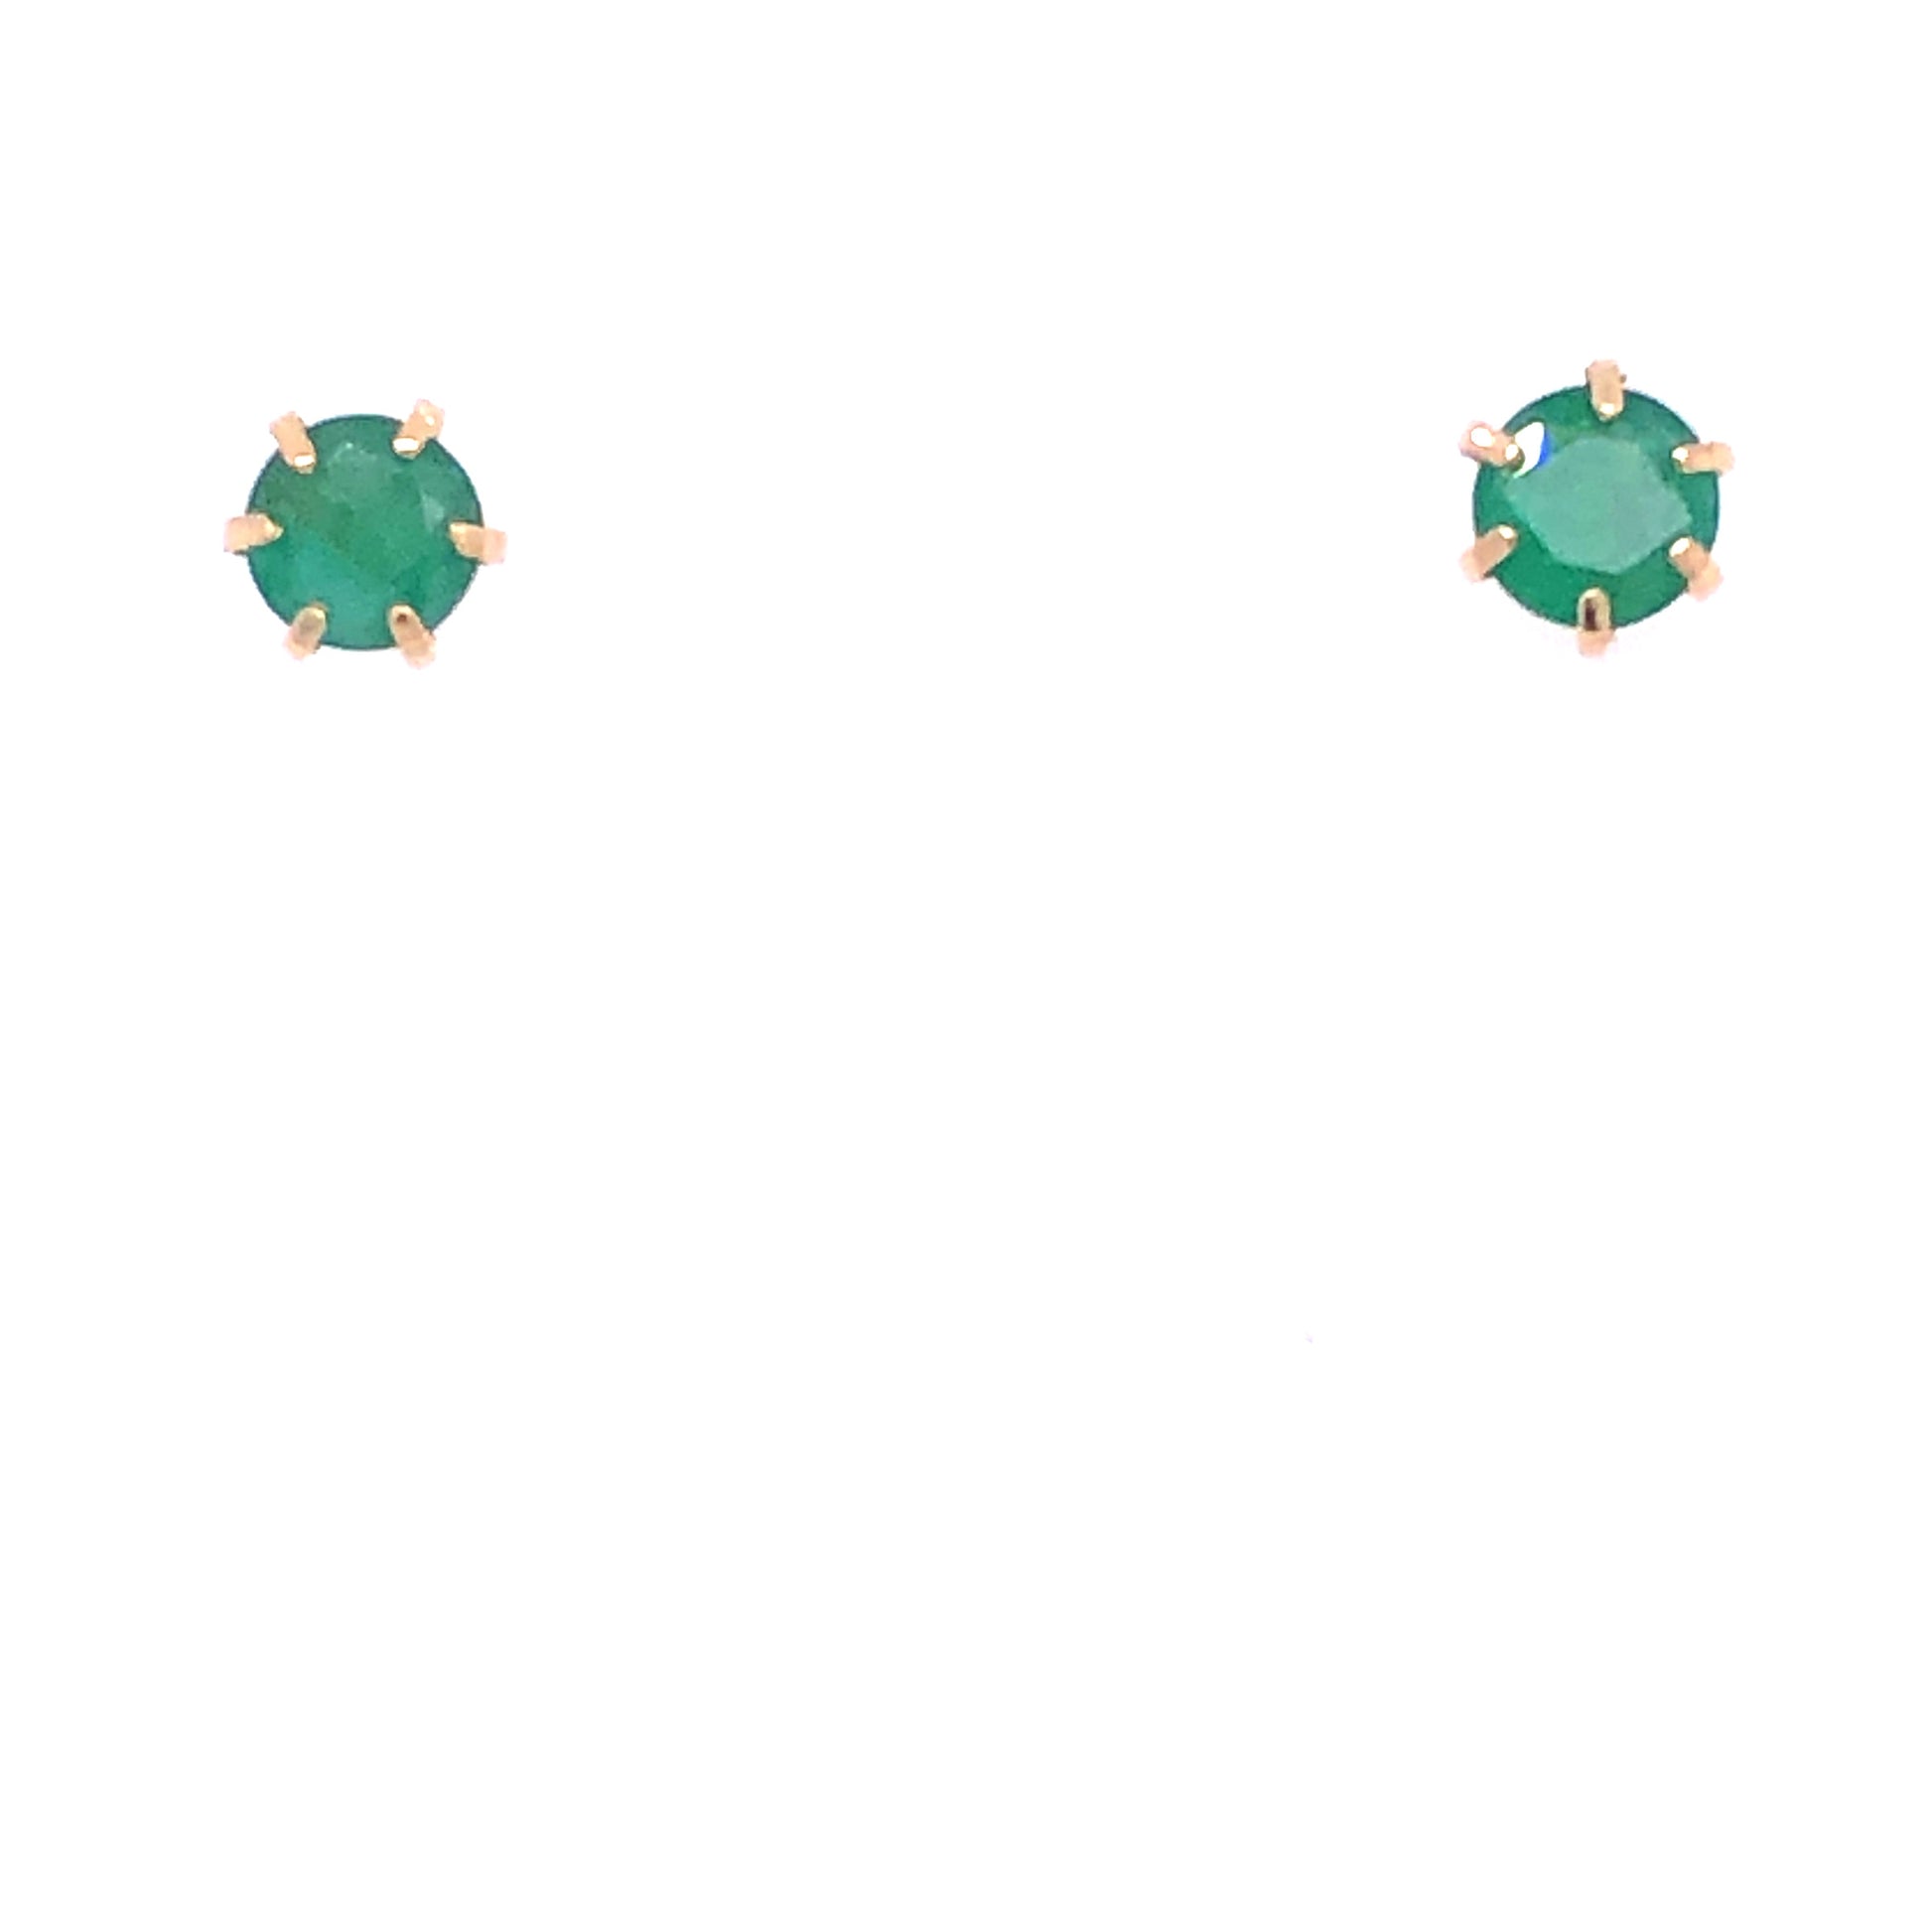 14K Gem Stone Emerald Earring Stud | Luby Gold Collection | Luby 